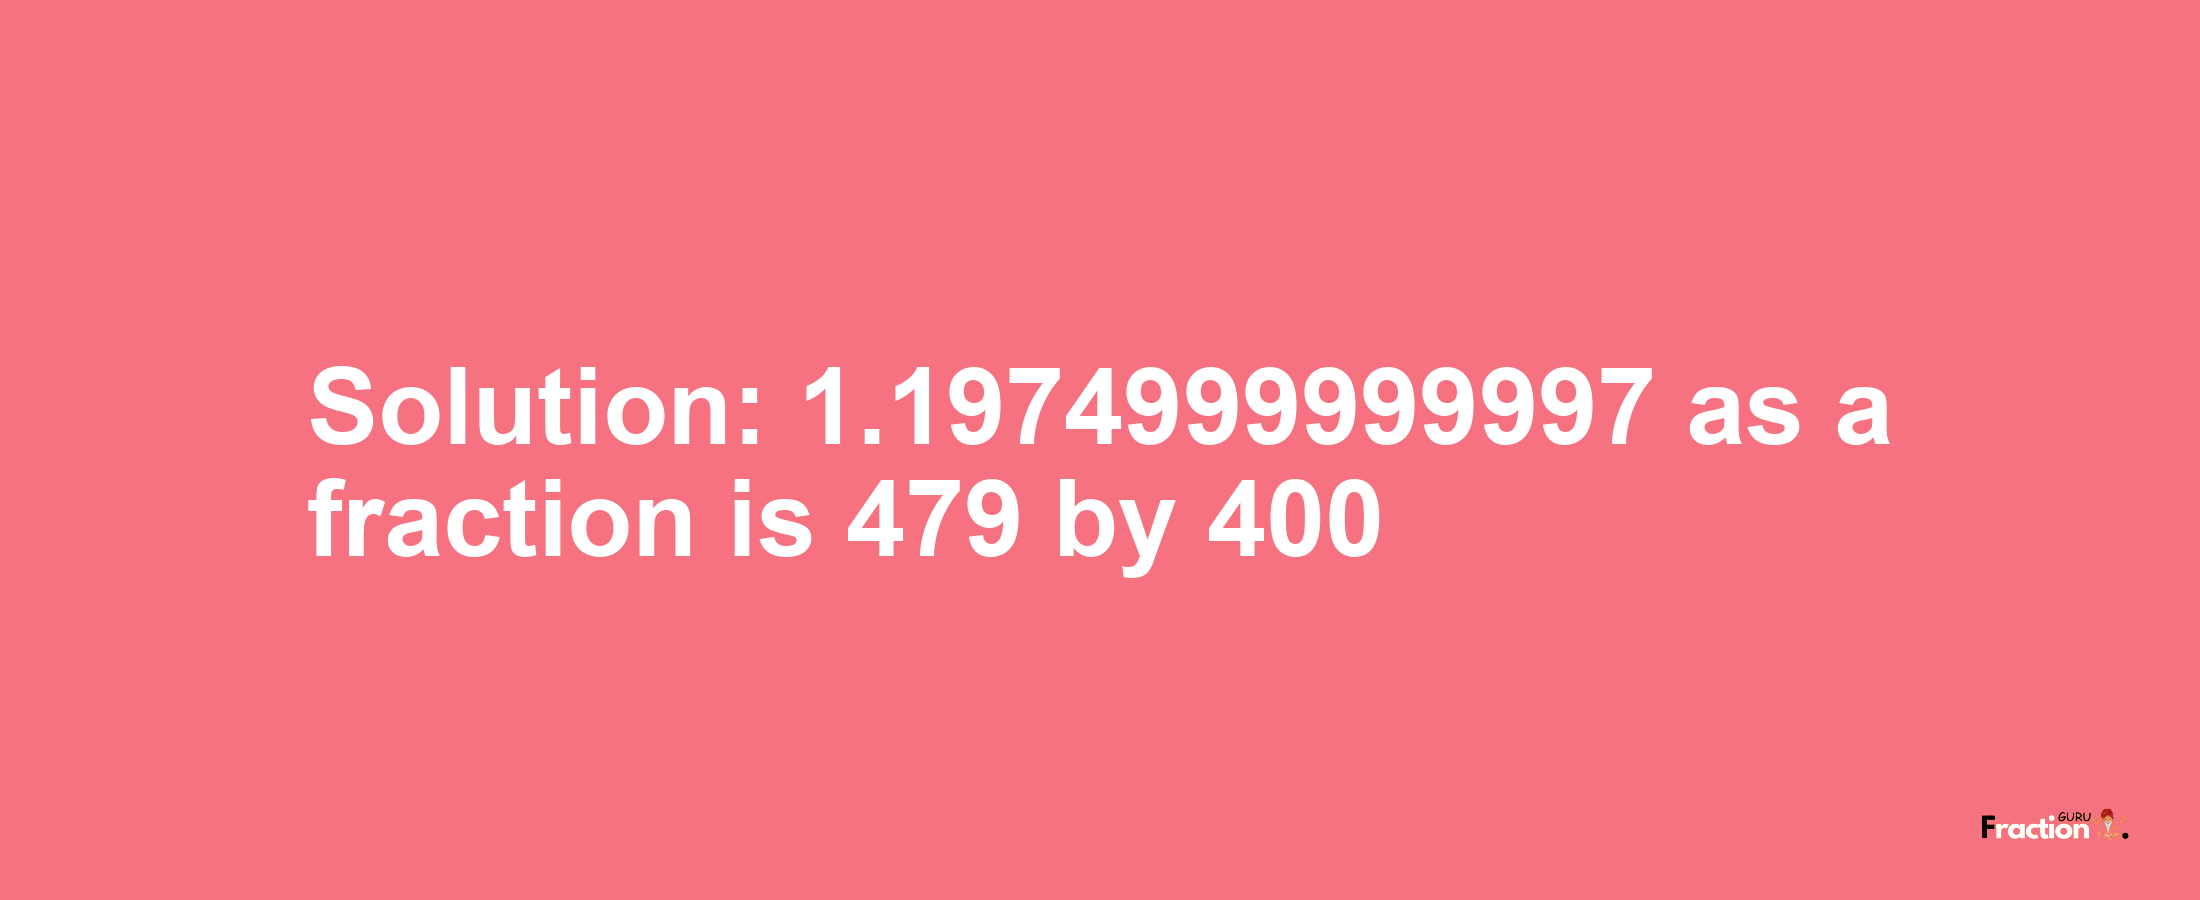 Solution:1.1974999999997 as a fraction is 479/400